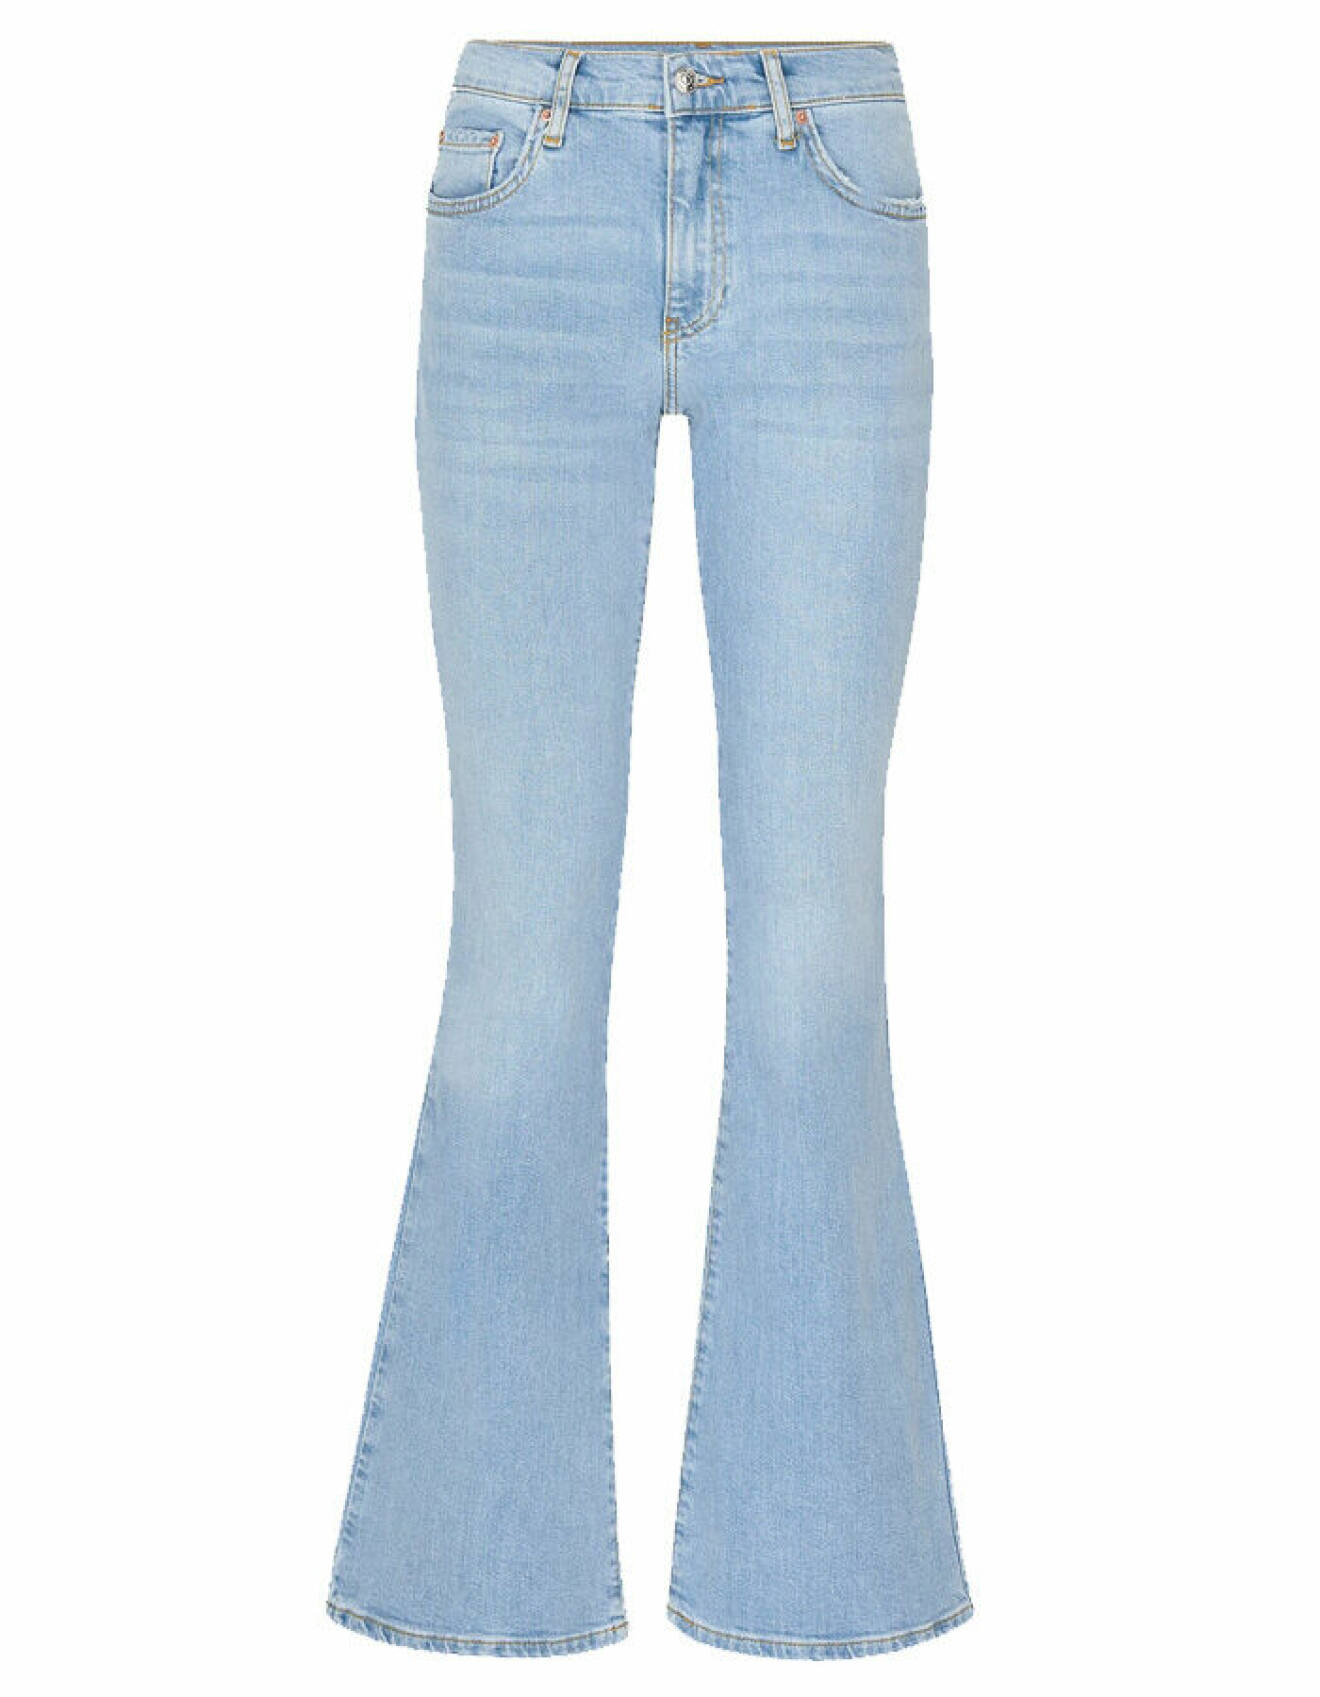 Bootcutjeans, Gina tricot